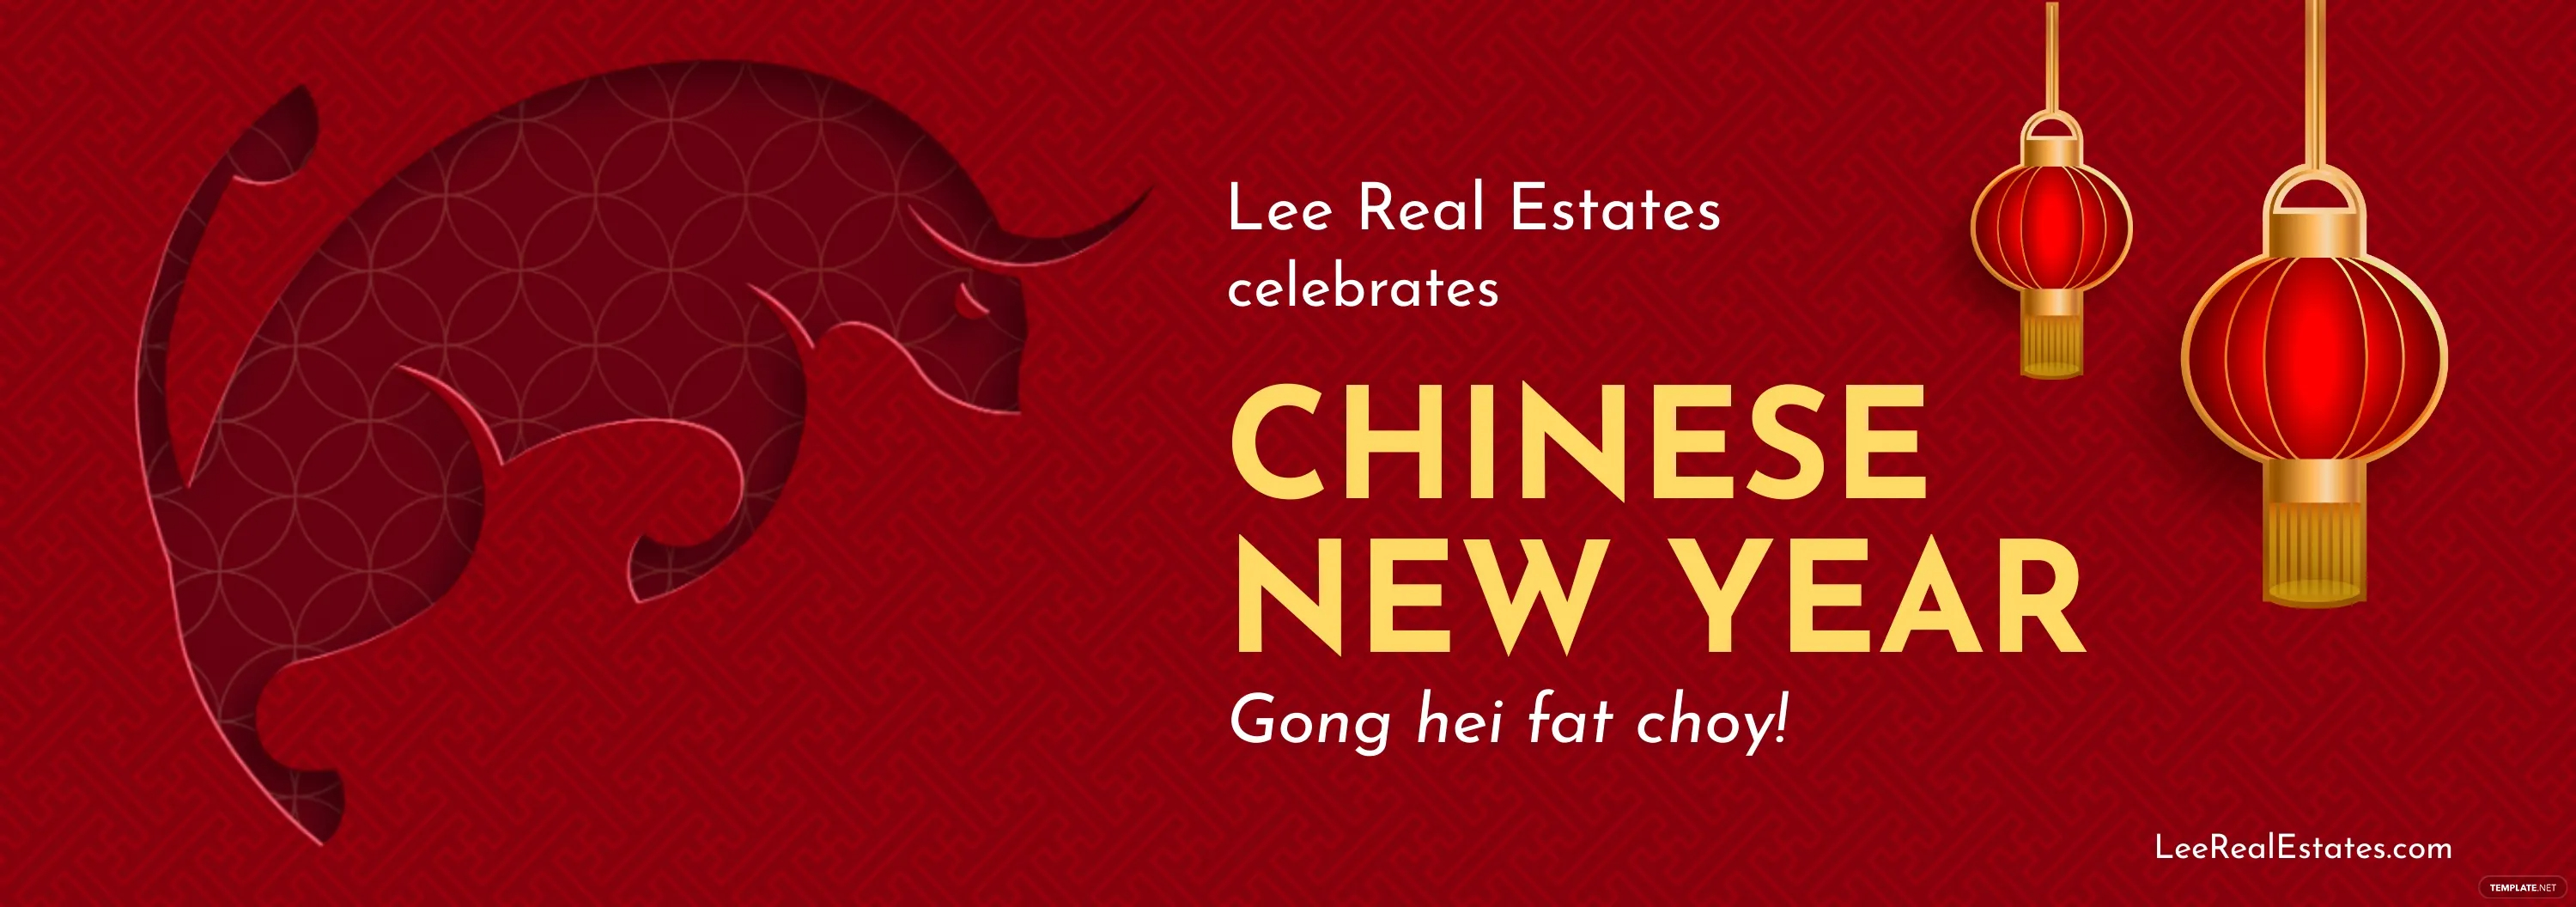 chinese-new-year-tumblr-banner-template